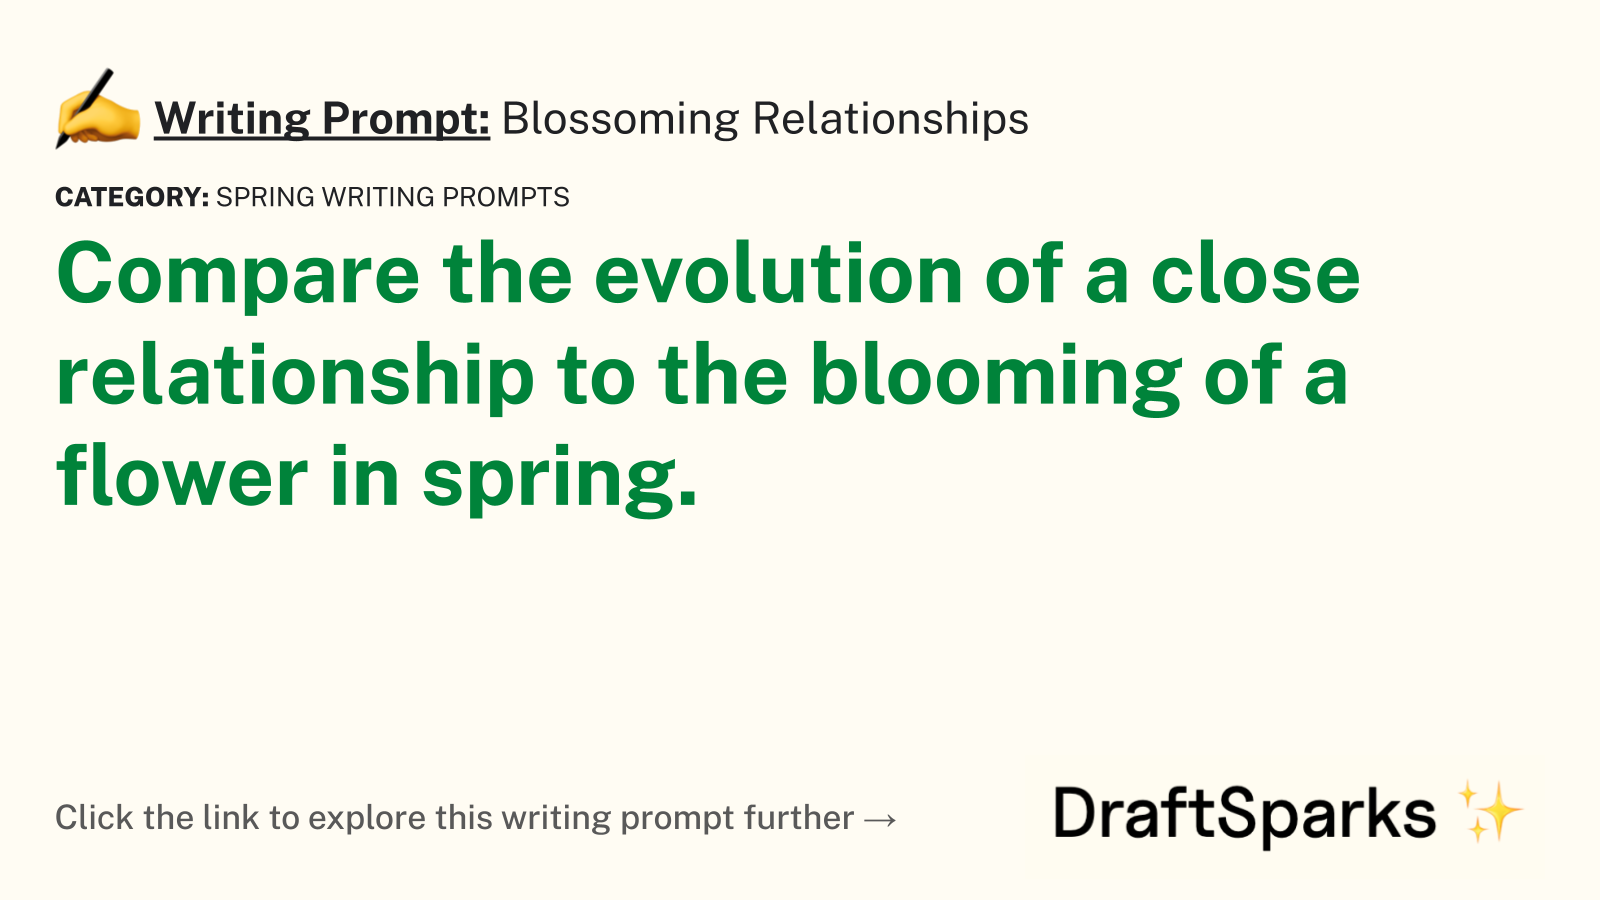 Blossoming Relationships